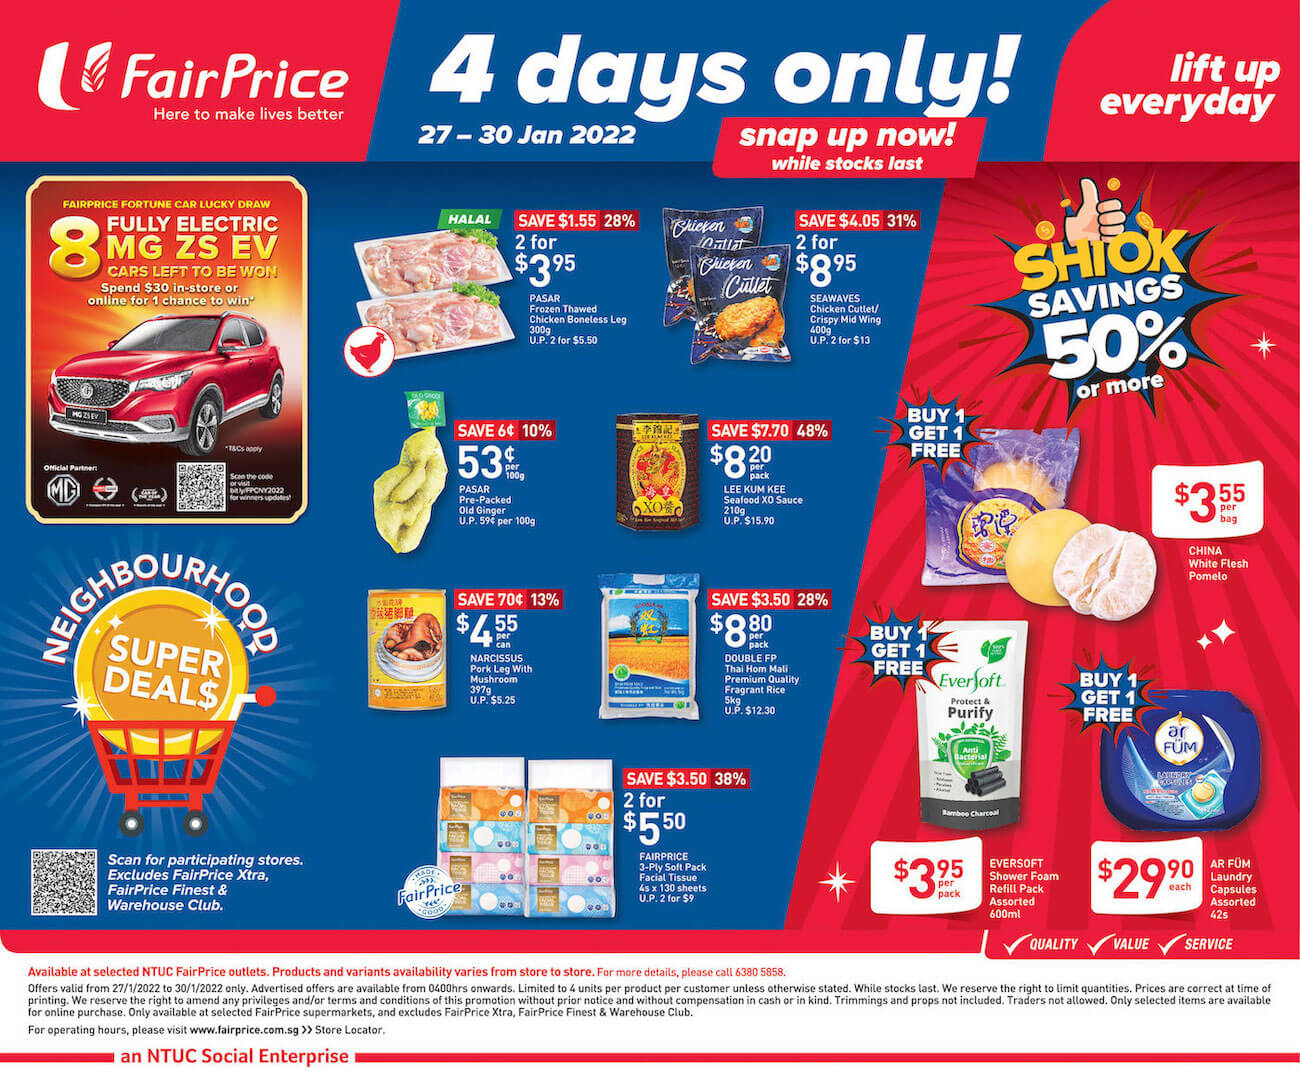 NTUC FairPrice,4 days only and shiok savings 50% or more